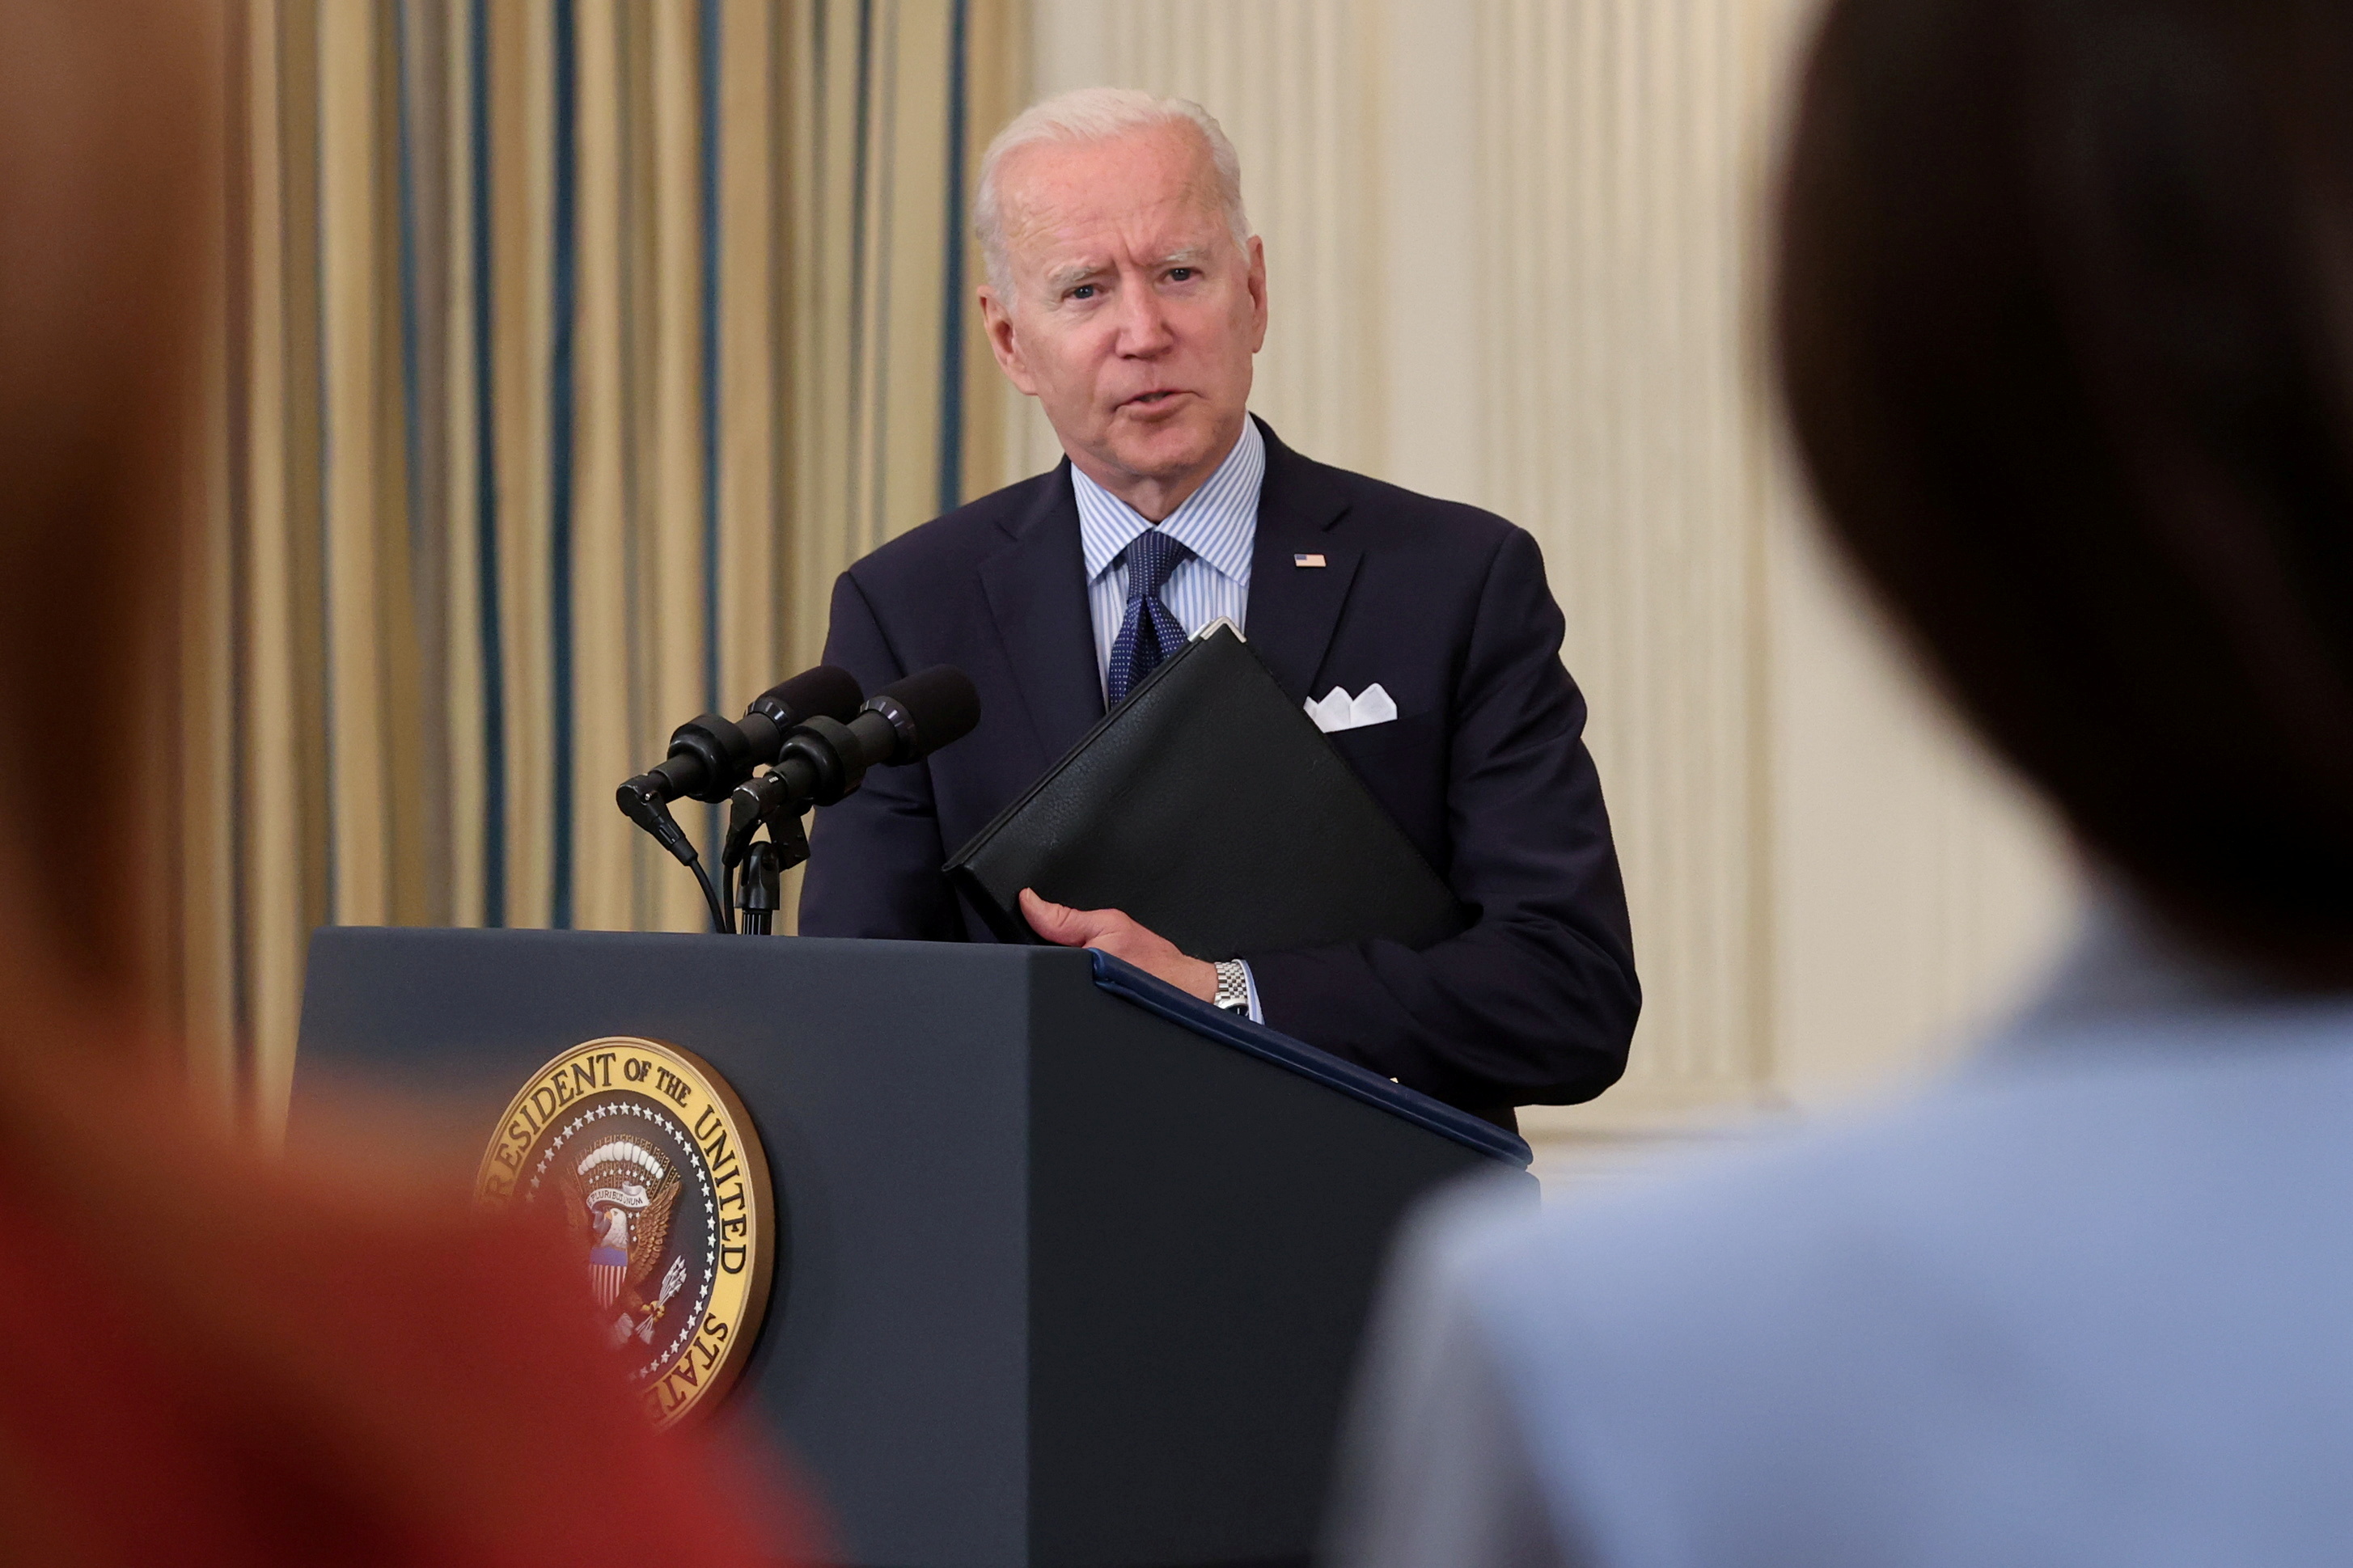 U.S. President Biden delivers remarks on the state of COVID-19 vaccinations, at the White House